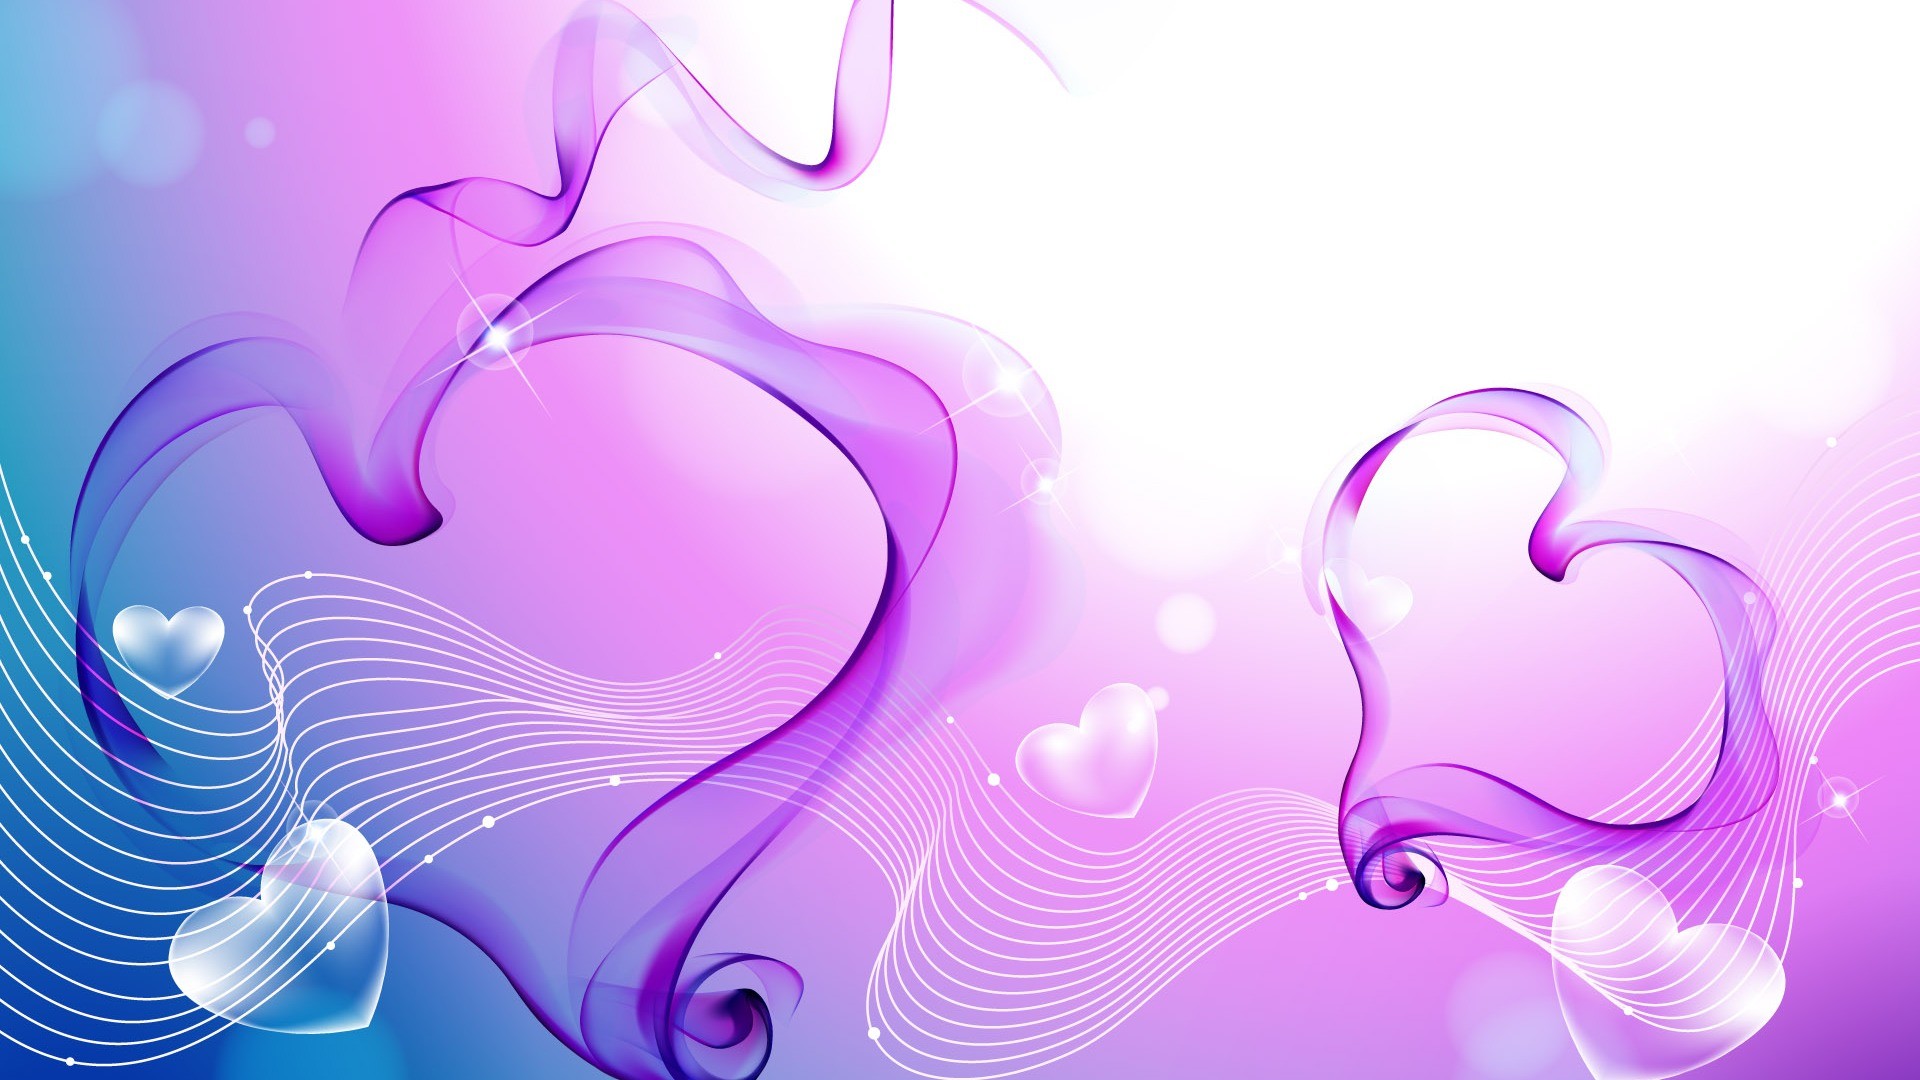 1920x1080 File Name: Love Abstract Wallpaper